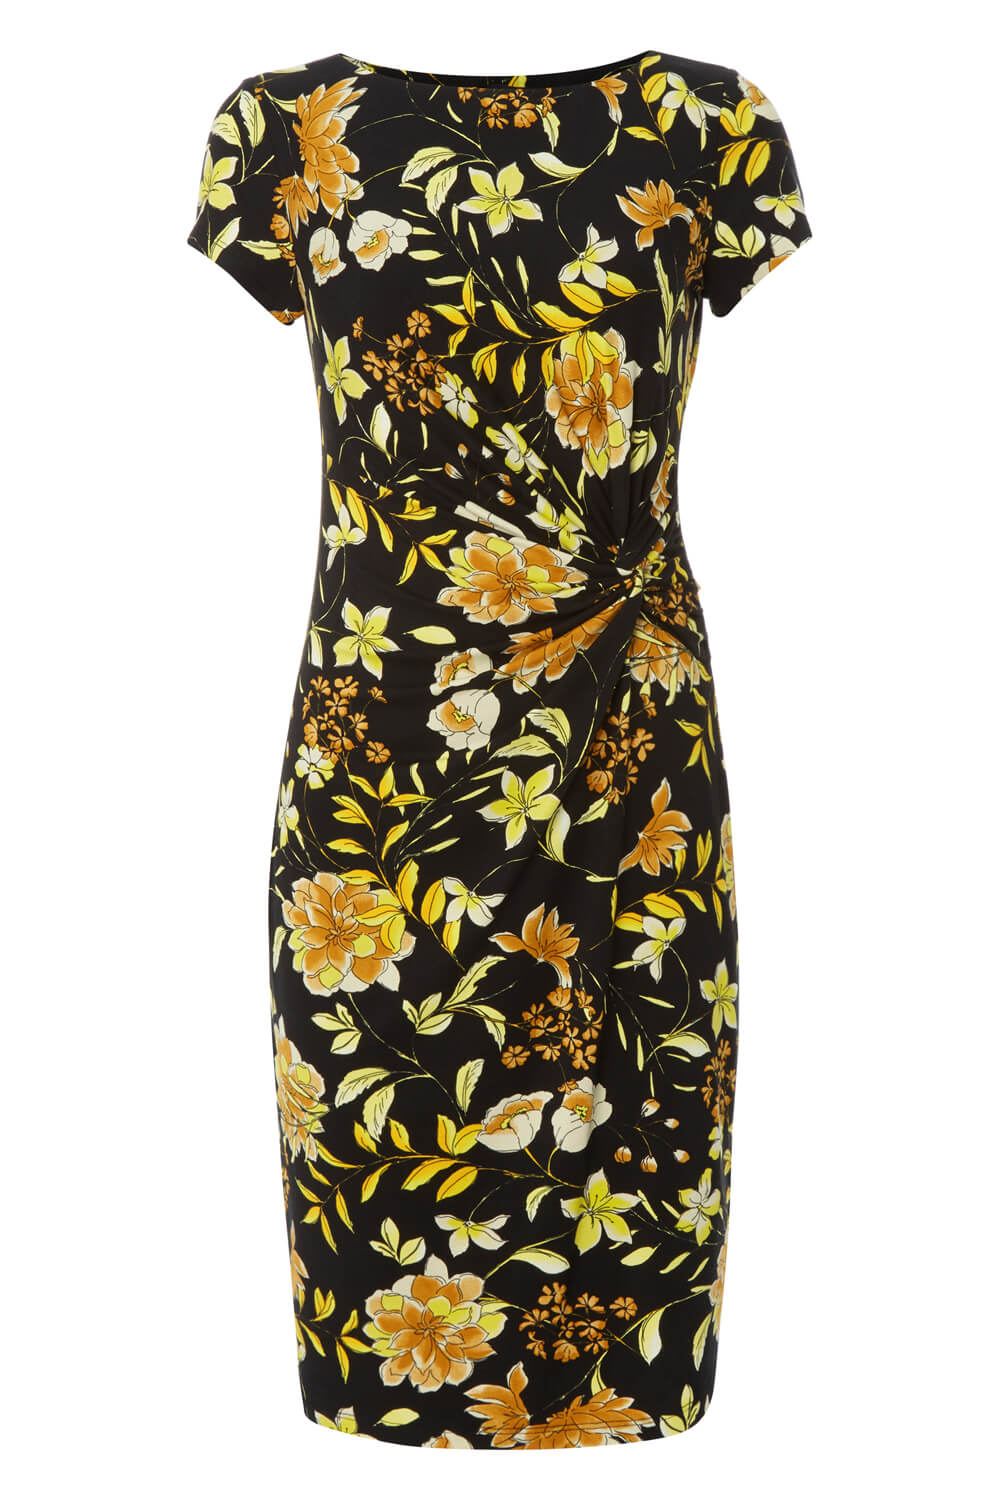 Yellow Floral Print Jersey Dress, Image 4 of 4